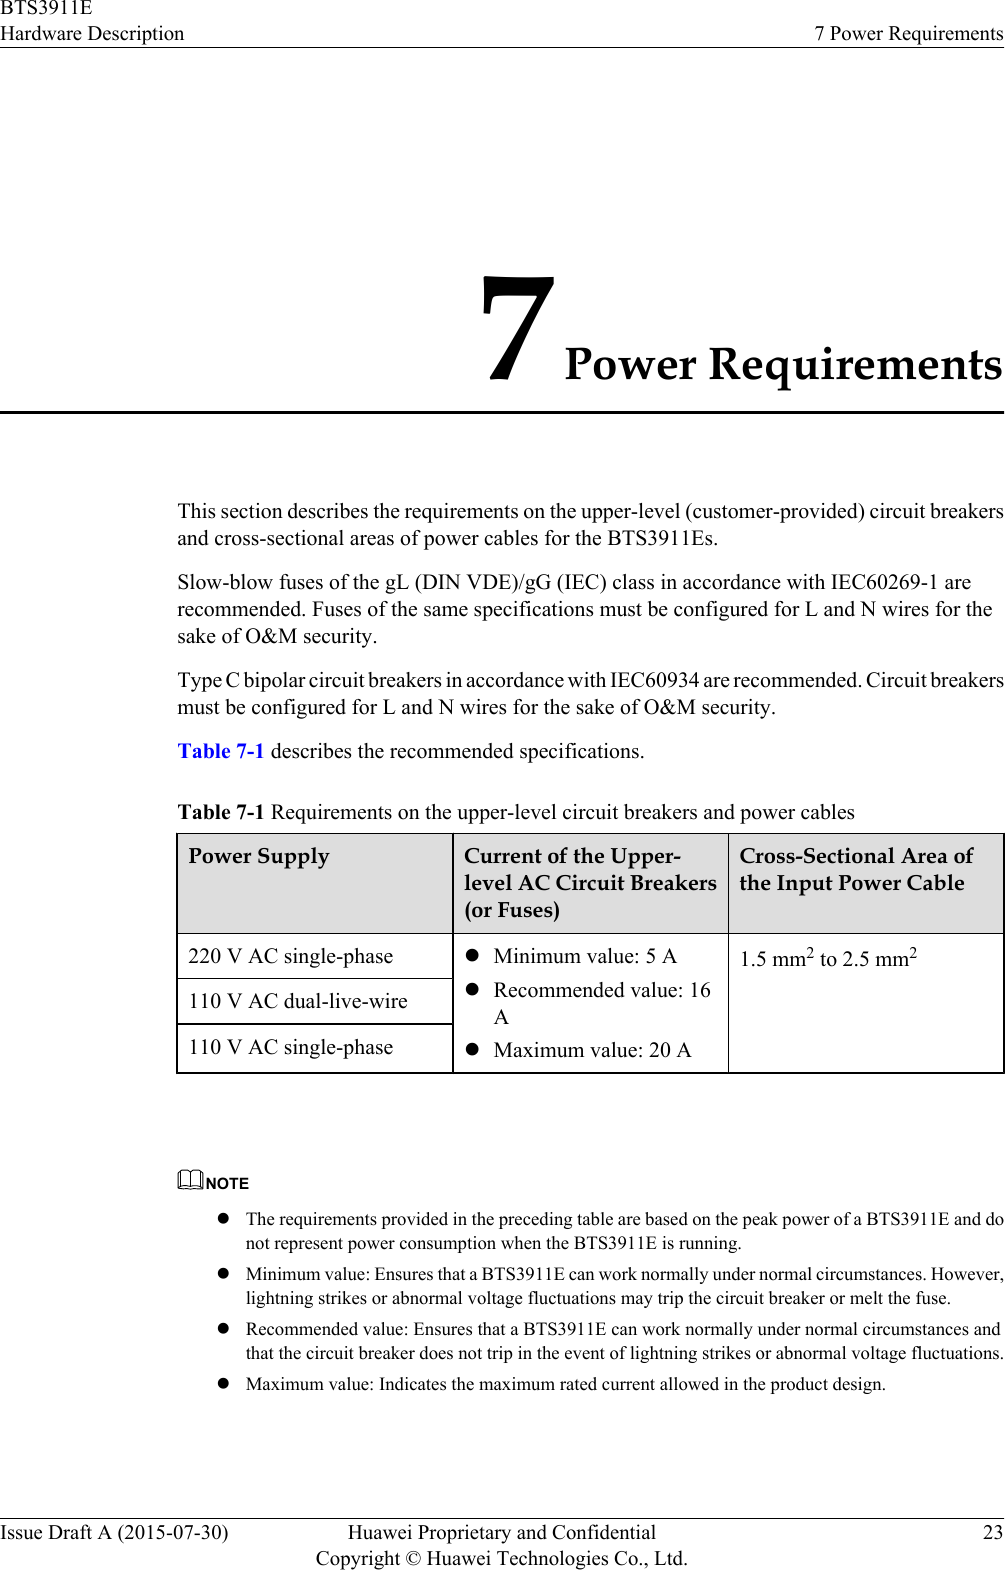 7 Power RequirementsThis section describes the requirements on the upper-level (customer-provided) circuit breakersand cross-sectional areas of power cables for the BTS3911Es.Slow-blow fuses of the gL (DIN VDE)/gG (IEC) class in accordance with IEC60269-1 arerecommended. Fuses of the same specifications must be configured for L and N wires for thesake of O&amp;M security.Type C bipolar circuit breakers in accordance with IEC60934 are recommended. Circuit breakersmust be configured for L and N wires for the sake of O&amp;M security.Table 7-1 describes the recommended specifications.Table 7-1 Requirements on the upper-level circuit breakers and power cablesPower Supply Current of the Upper-level AC Circuit Breakers(or Fuses)Cross-Sectional Area ofthe Input Power Cable220 V AC single-phase lMinimum value: 5 AlRecommended value: 16AlMaximum value: 20 A1.5 mm2 to 2.5 mm2110 V AC dual-live-wire110 V AC single-phase NOTElThe requirements provided in the preceding table are based on the peak power of a BTS3911E and donot represent power consumption when the BTS3911E is running.lMinimum value: Ensures that a BTS3911E can work normally under normal circumstances. However,lightning strikes or abnormal voltage fluctuations may trip the circuit breaker or melt the fuse.lRecommended value: Ensures that a BTS3911E can work normally under normal circumstances andthat the circuit breaker does not trip in the event of lightning strikes or abnormal voltage fluctuations.lMaximum value: Indicates the maximum rated current allowed in the product design.BTS3911EHardware Description 7 Power RequirementsIssue Draft A (2015-07-30) Huawei Proprietary and ConfidentialCopyright © Huawei Technologies Co., Ltd.23